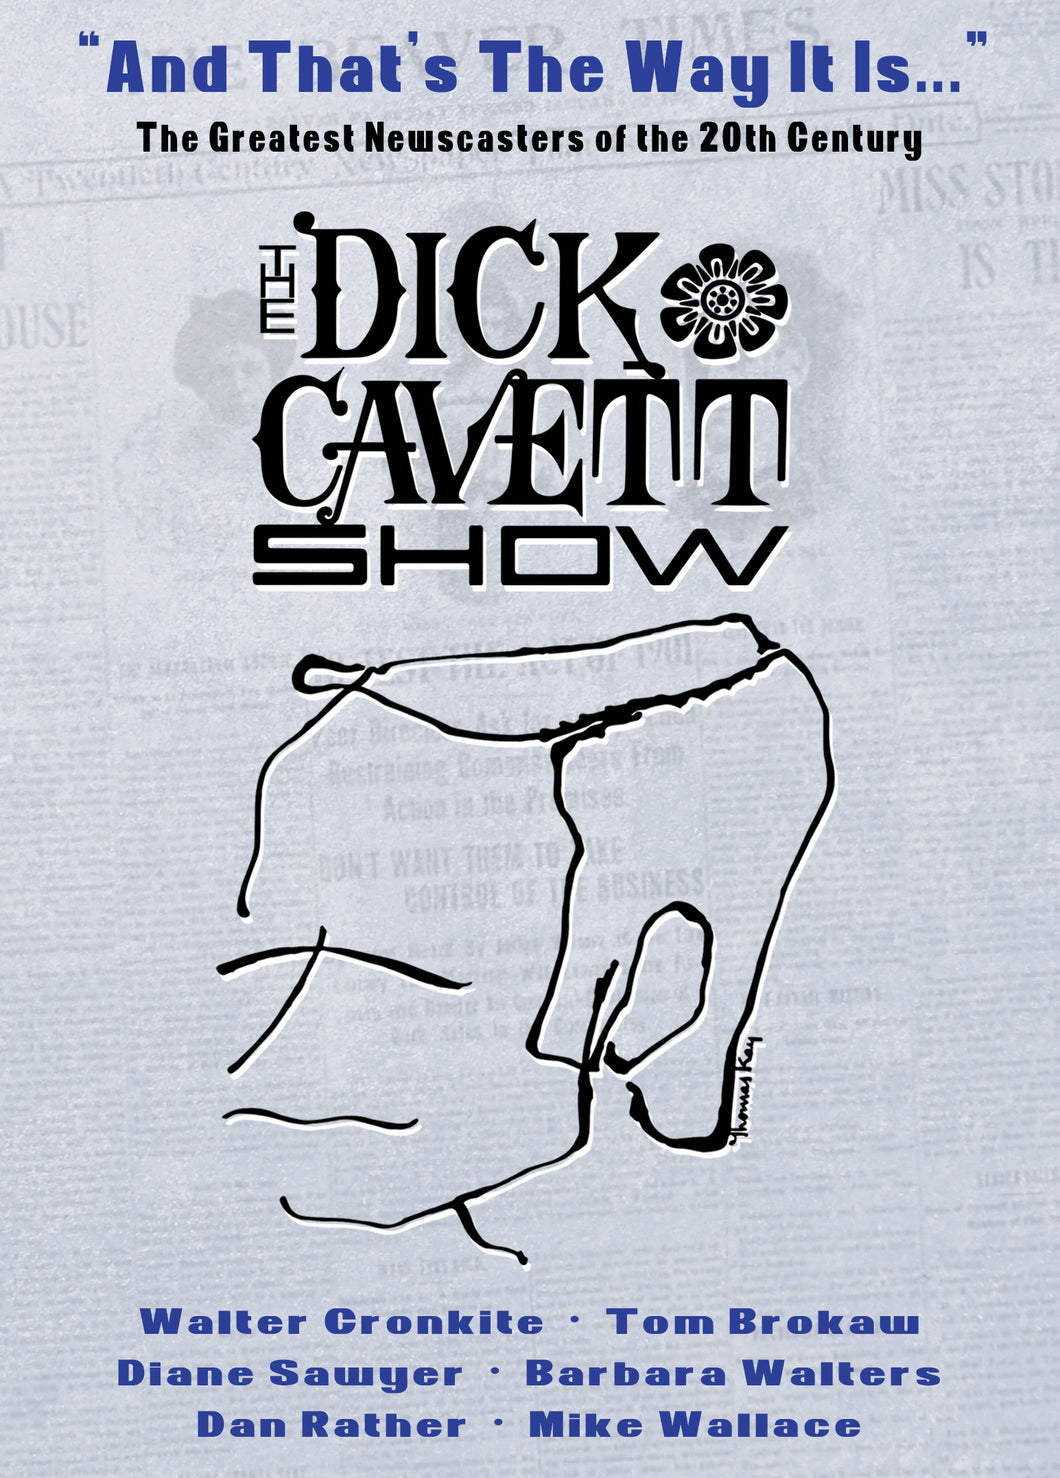 Dick Cavett Show: And That's The Way It Is (DVD)